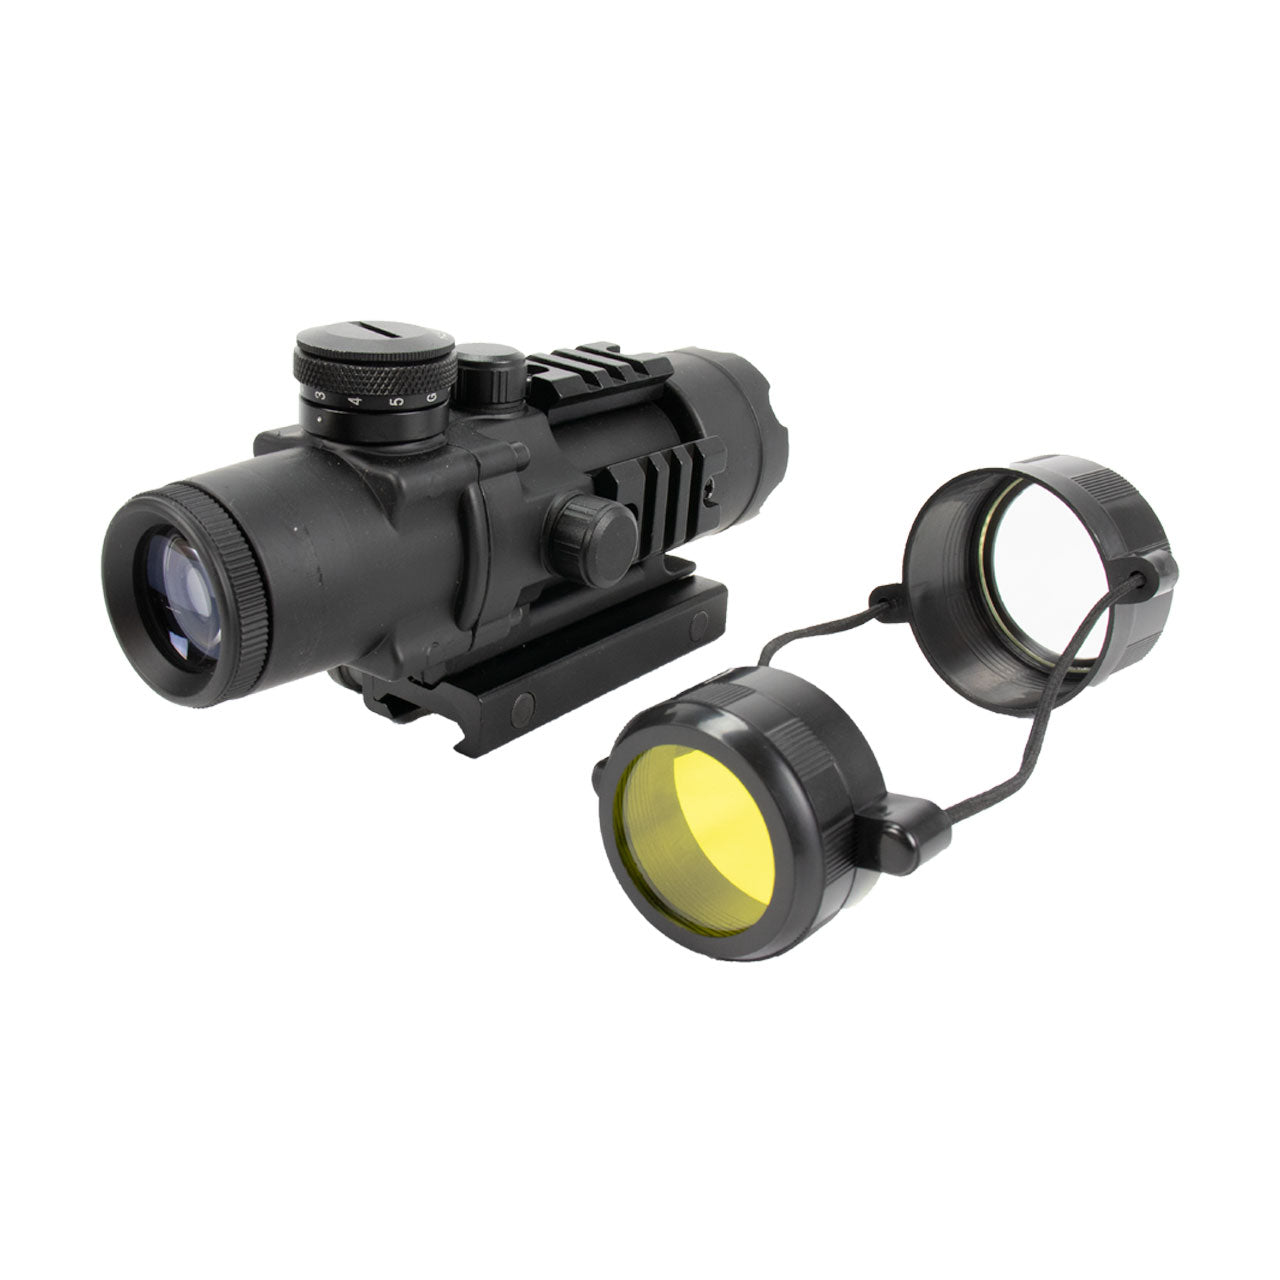 Element 4x32 Compact Scope with Illuminated Reticle